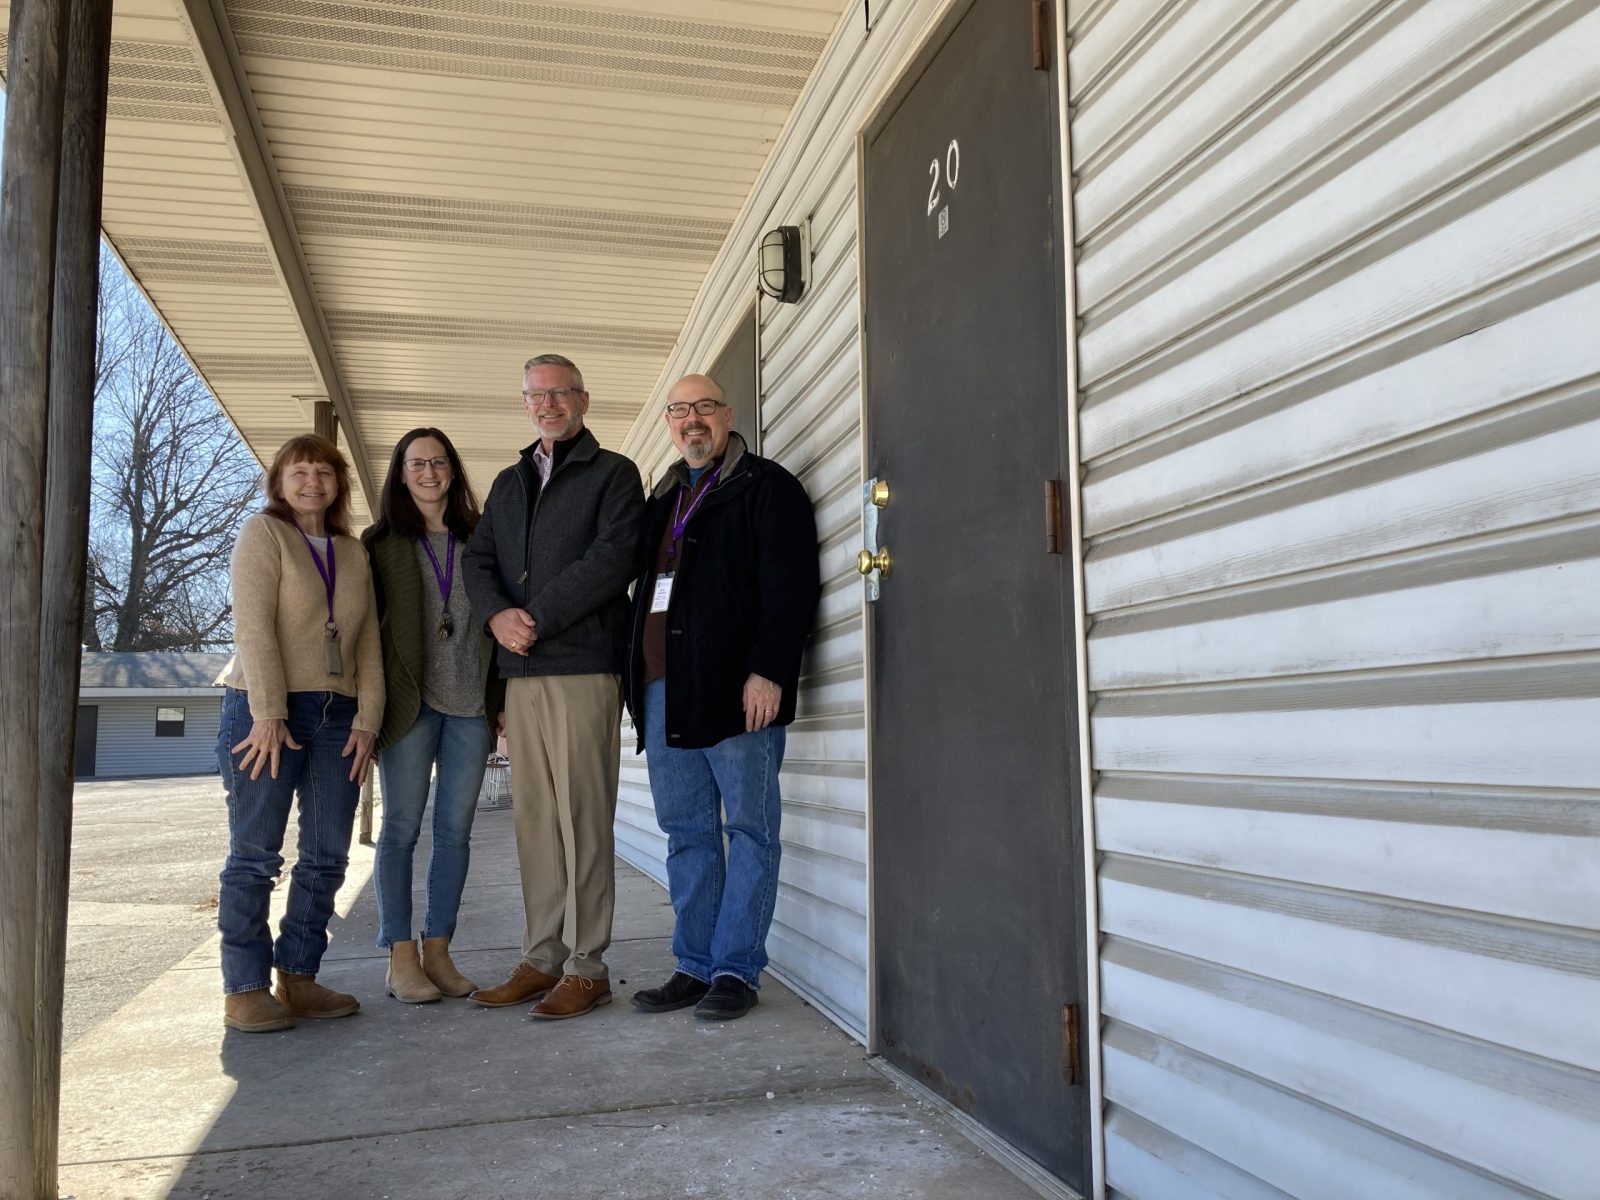 Pictured in front of the Rancho Emergency Shelter (from left) are Michelle Johnson, housing case manager; Rachel Davis, program manager; Ken Palermo, executive director of Catholic Charities of Southern Missouri; and John Lunardini, director of Social Enterprise and Facilities for Catholic Charities. (Photo by Jackie Rehwald)